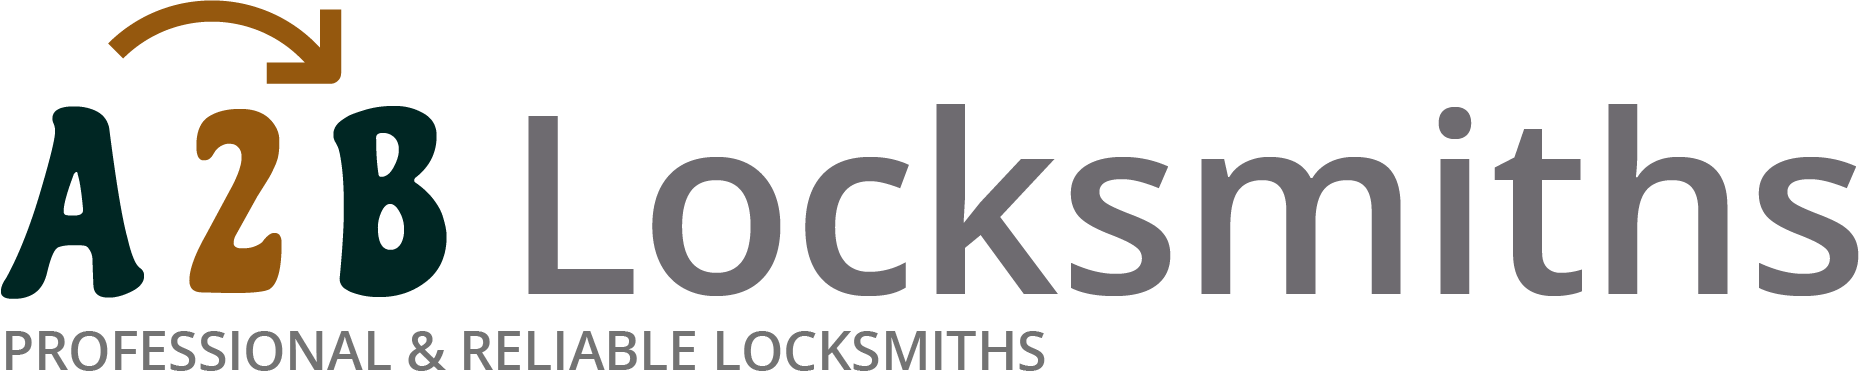 If you are locked out of house in Aberystwyth, our 24/7 local emergency locksmith services can help you.